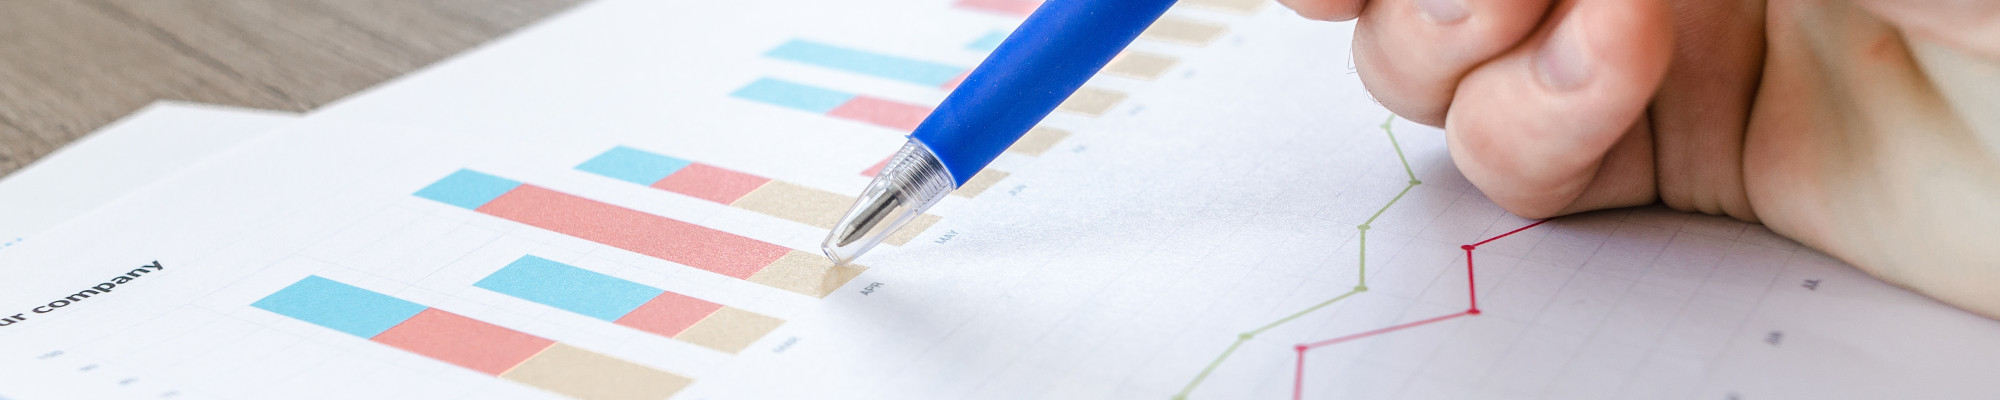 Image of a person holding a pen, pointing at a paper containing bar and line charts